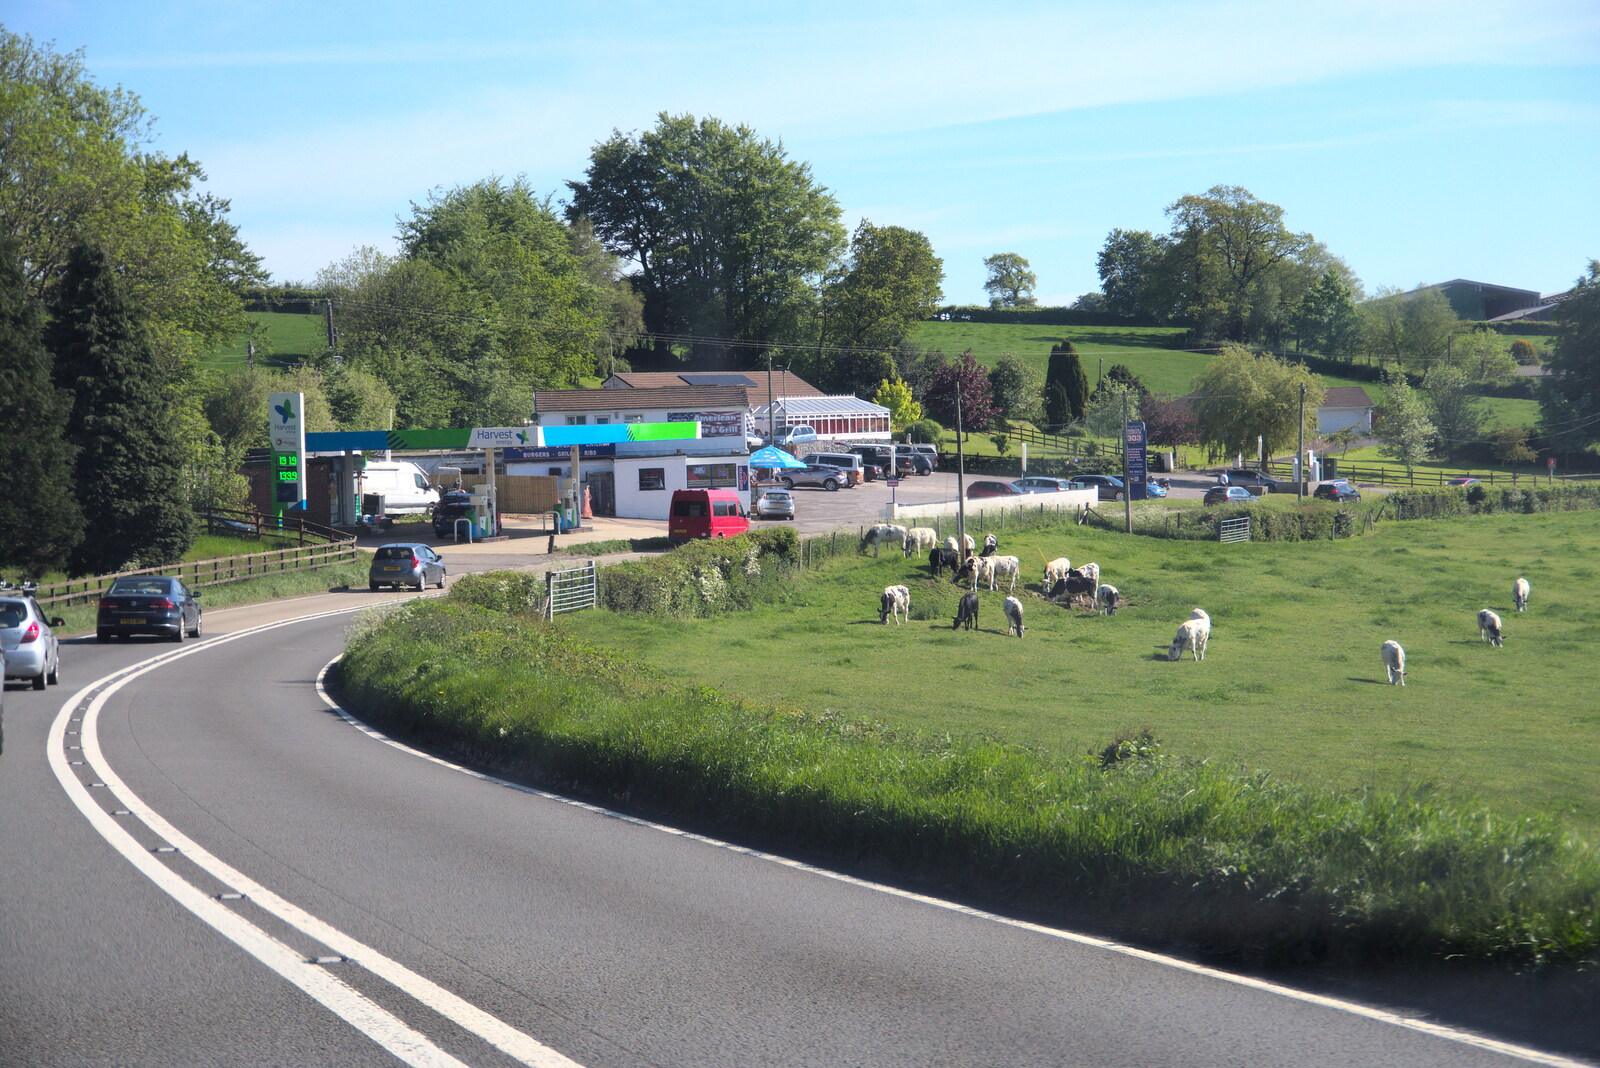 A herd of cows near the A303 from A Trip to Grandma J's, Spreyton, Devon - 2nd June 2021